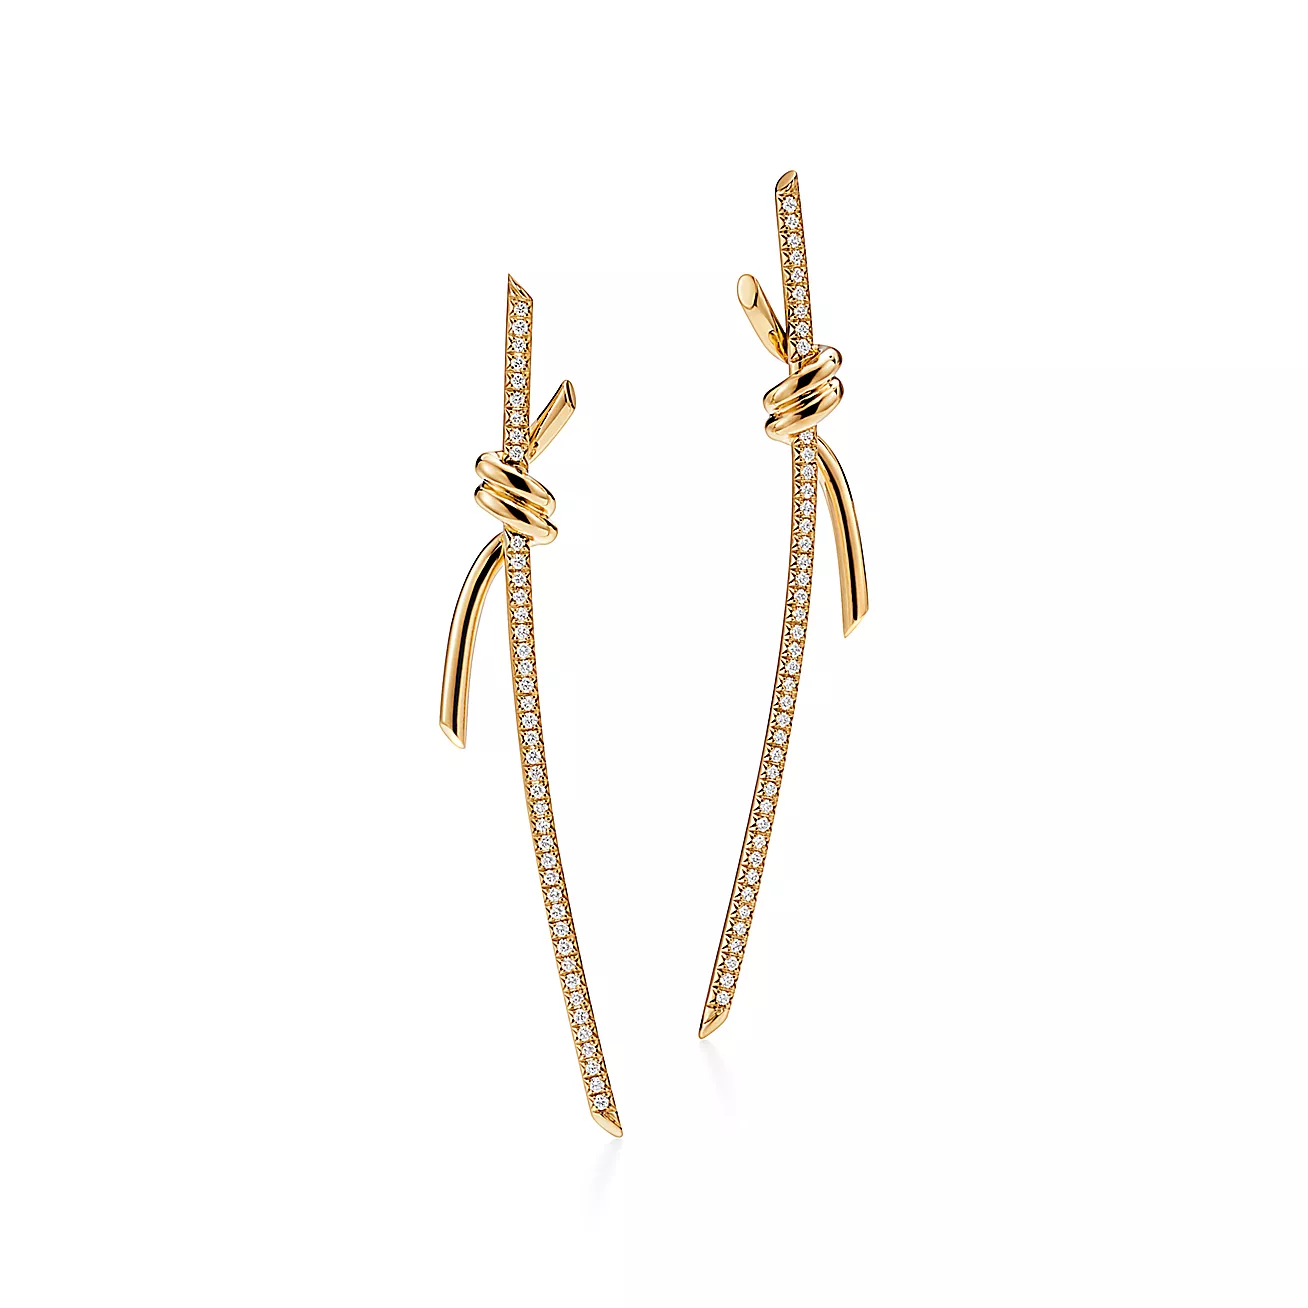 Tiffany Knot Drop Earrings in 18k Gold with Diamonds - Click Image to Close